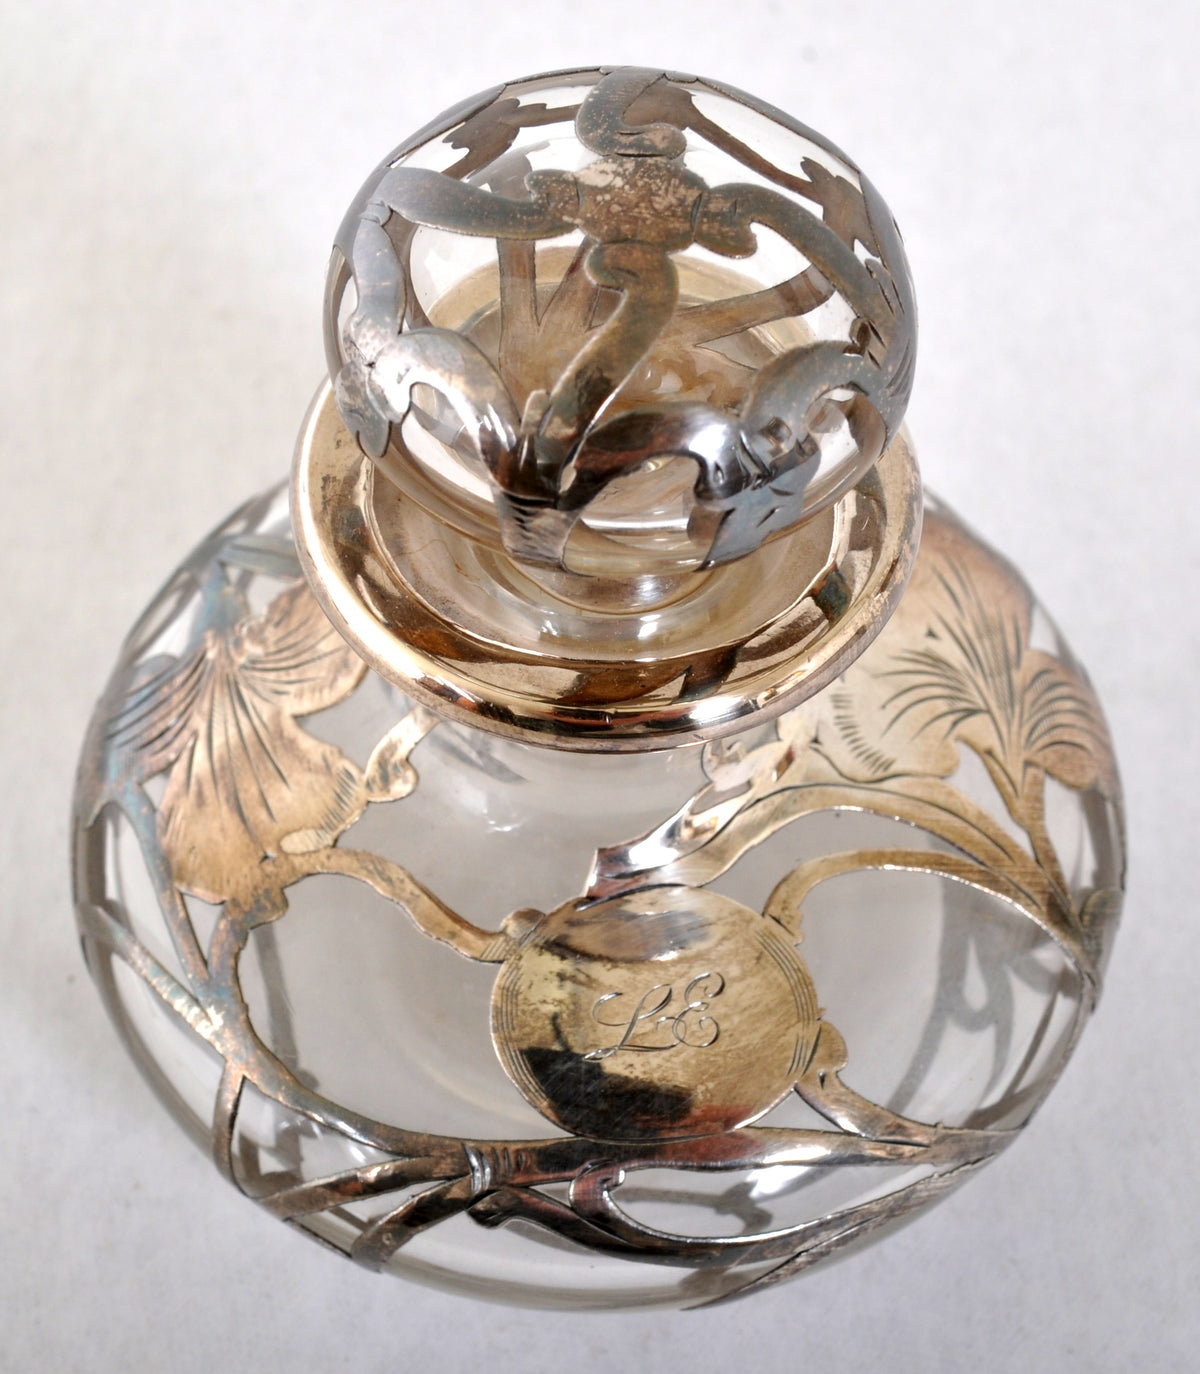 Antique Bohemian Glass Perfume Bottle with Engraved Silver Overlay, Circa 1890